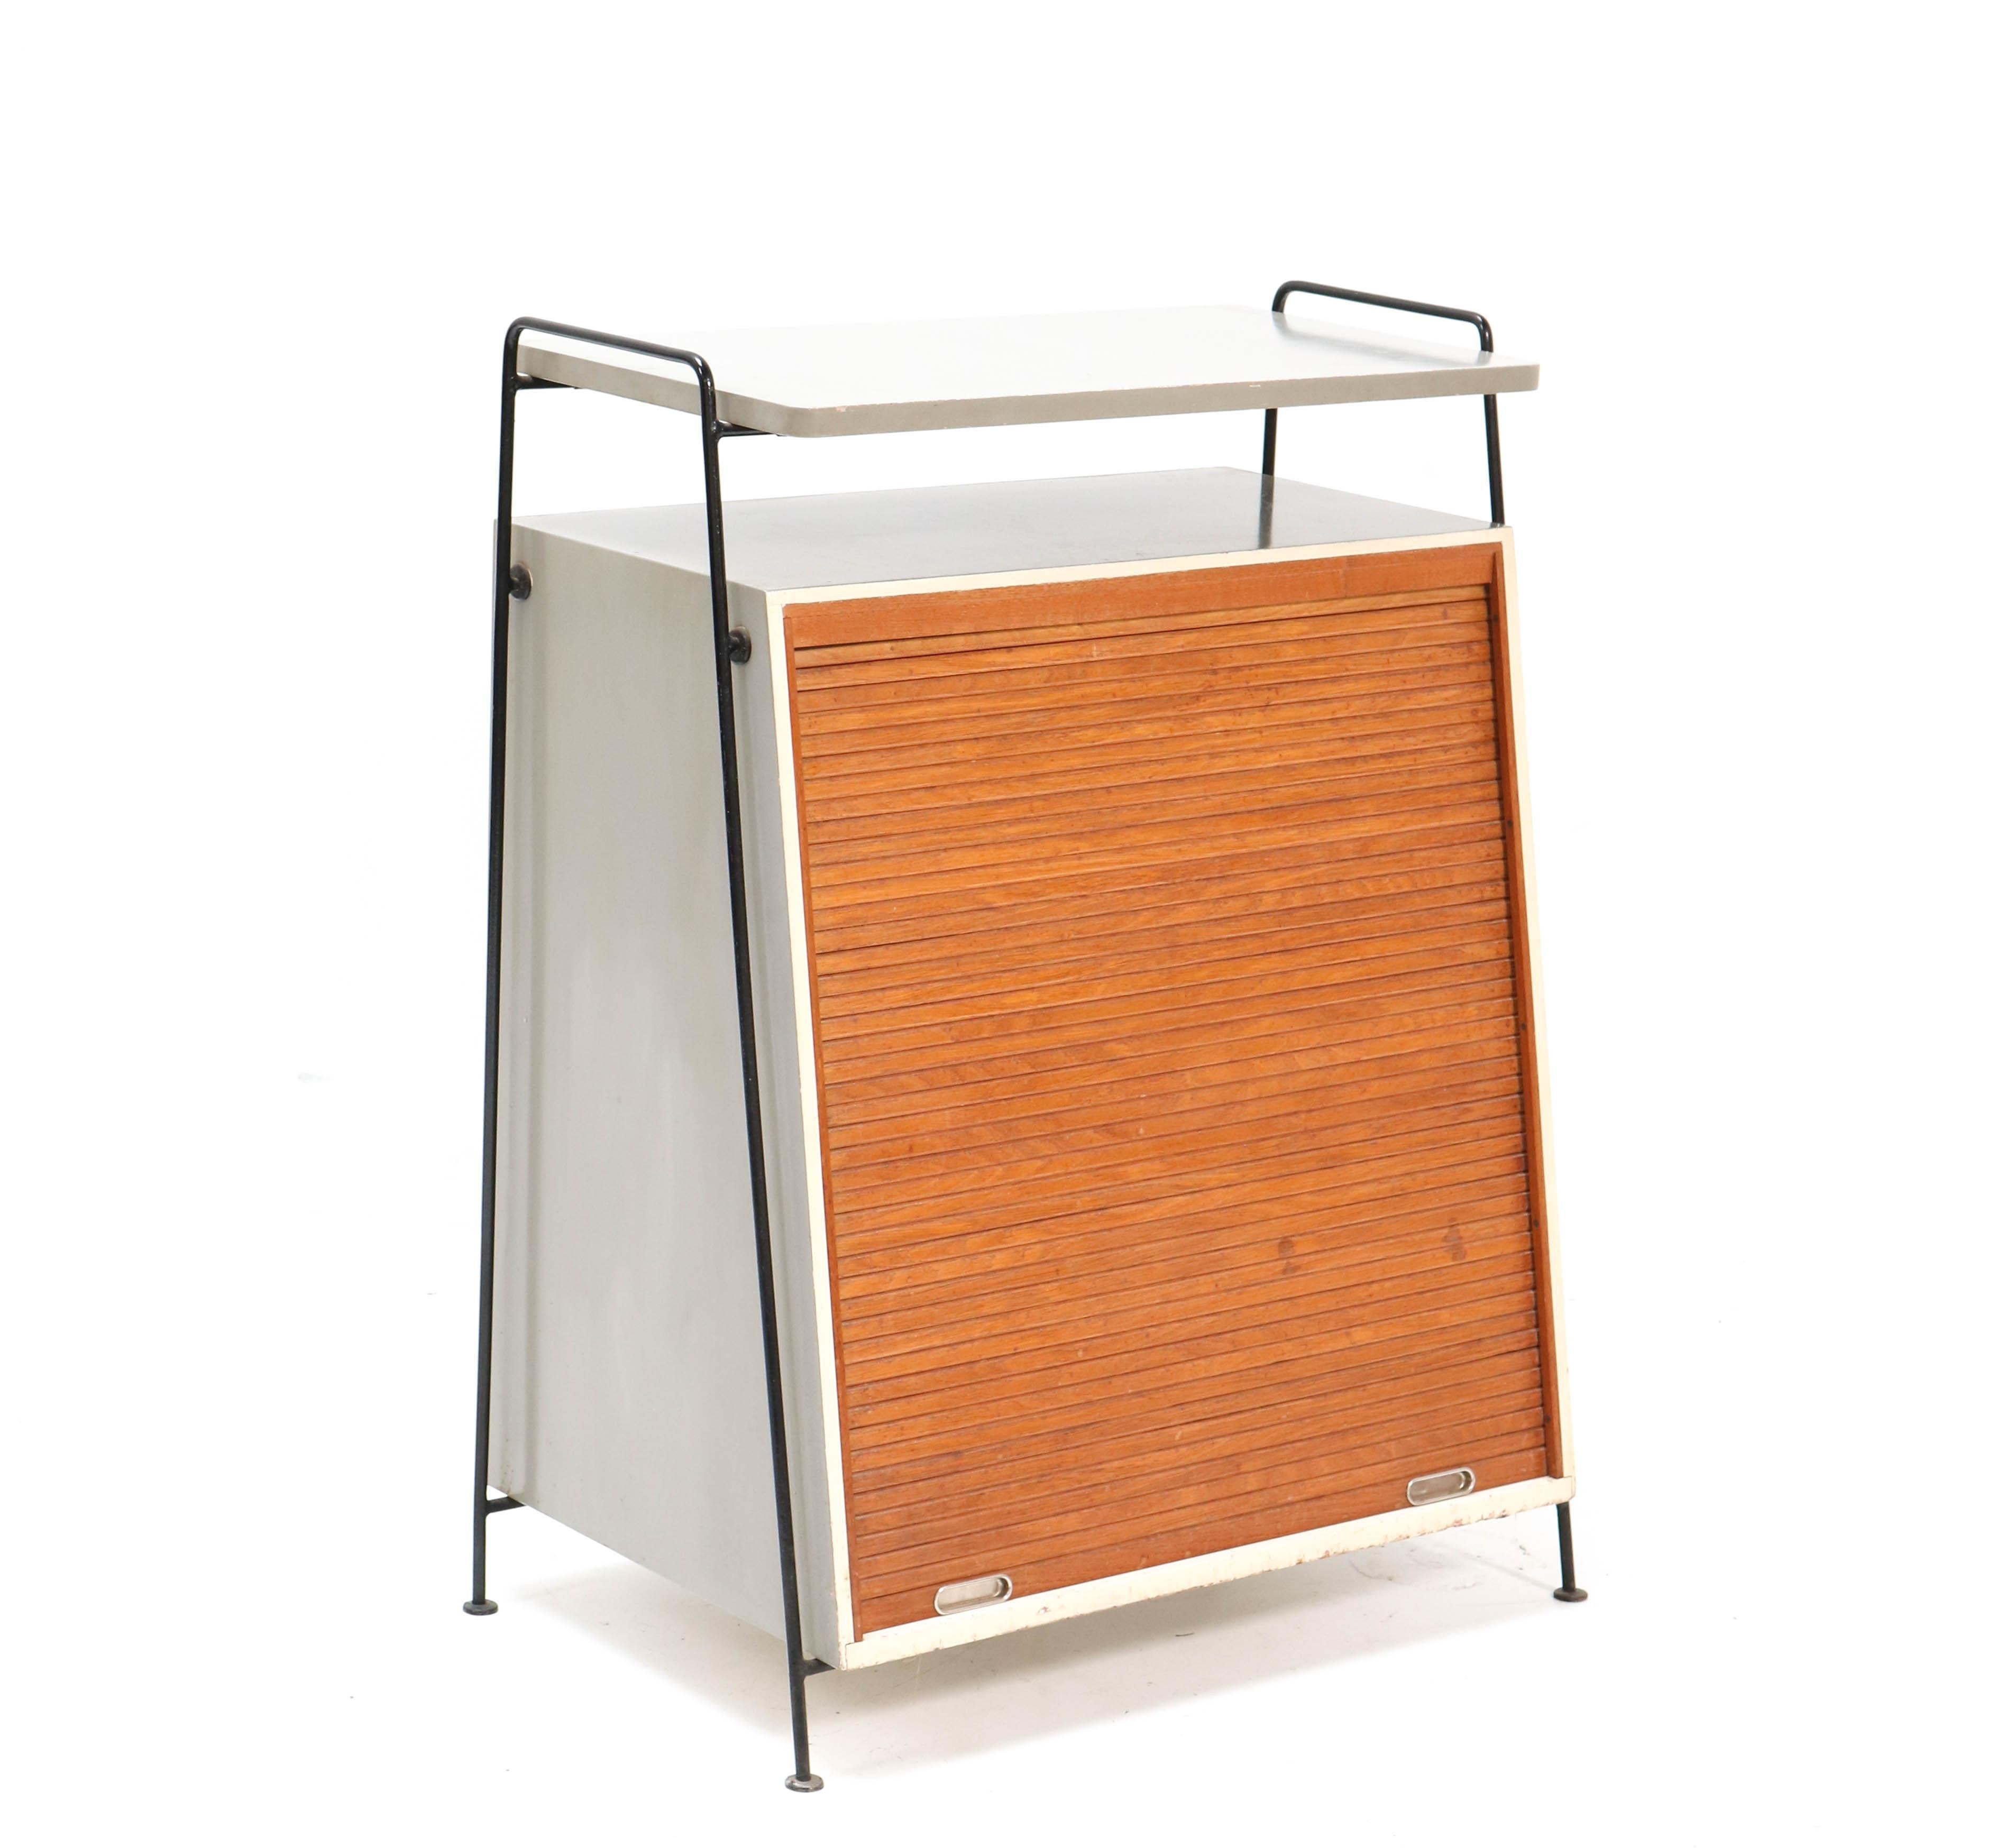 Lacquered Mid-Century Modern Cabinet Attributed to 't Spectrum Bergeijk, 1960s For Sale